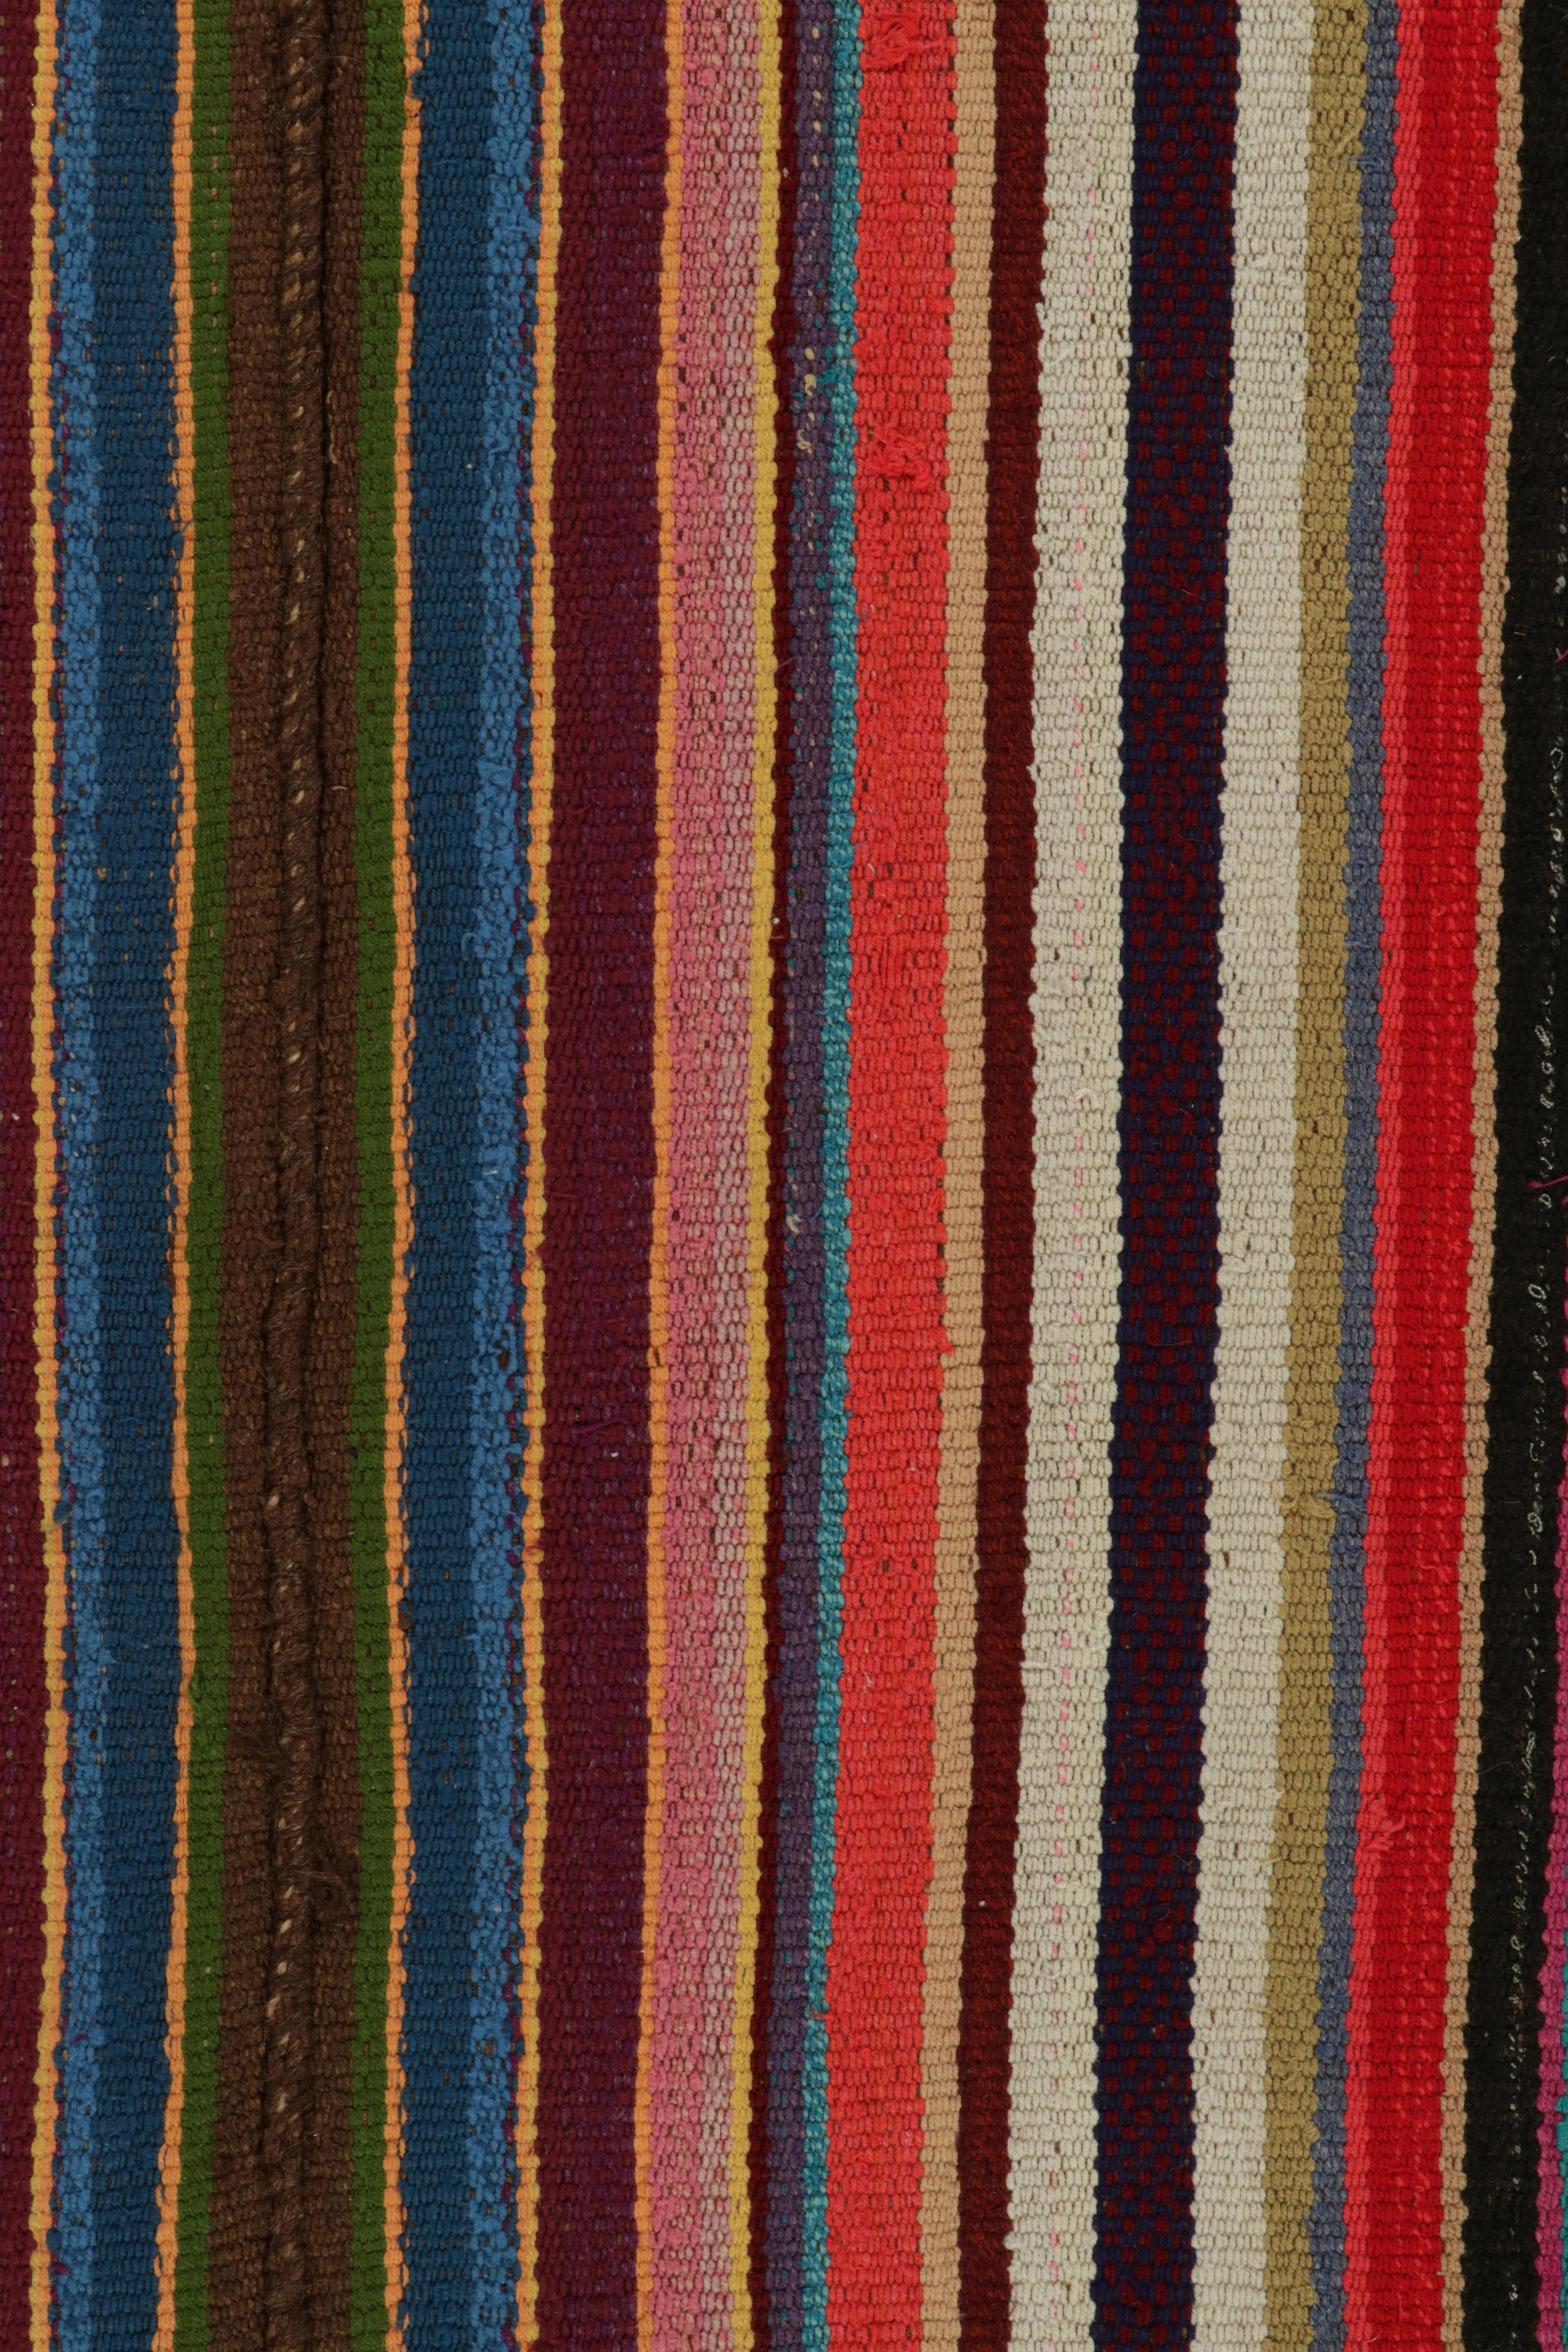 Hand-Knotted 1950s Vintage Chaput Kilim Rug in Multicolor Stripes, Patterns by Rug & Kilim For Sale